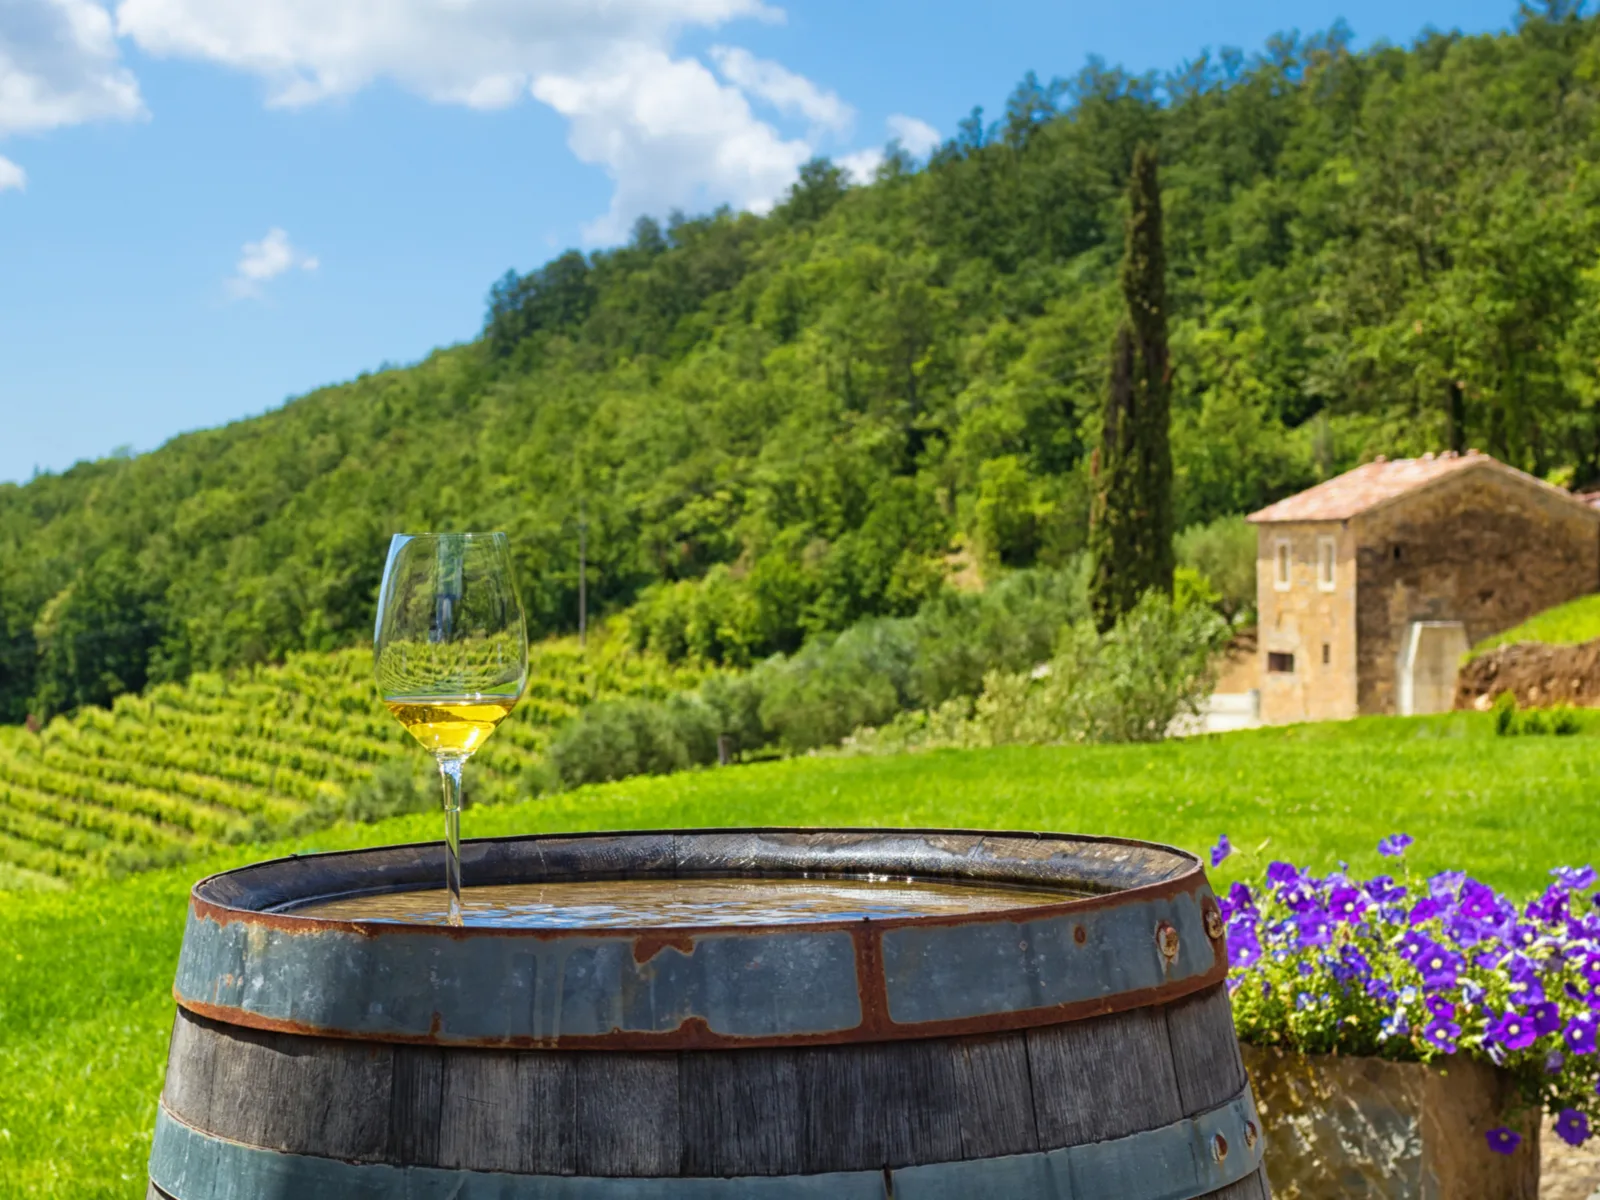 One of the must-do things in Croatia, the vineyards of Isteria, pictured with a wine glass on a barrel